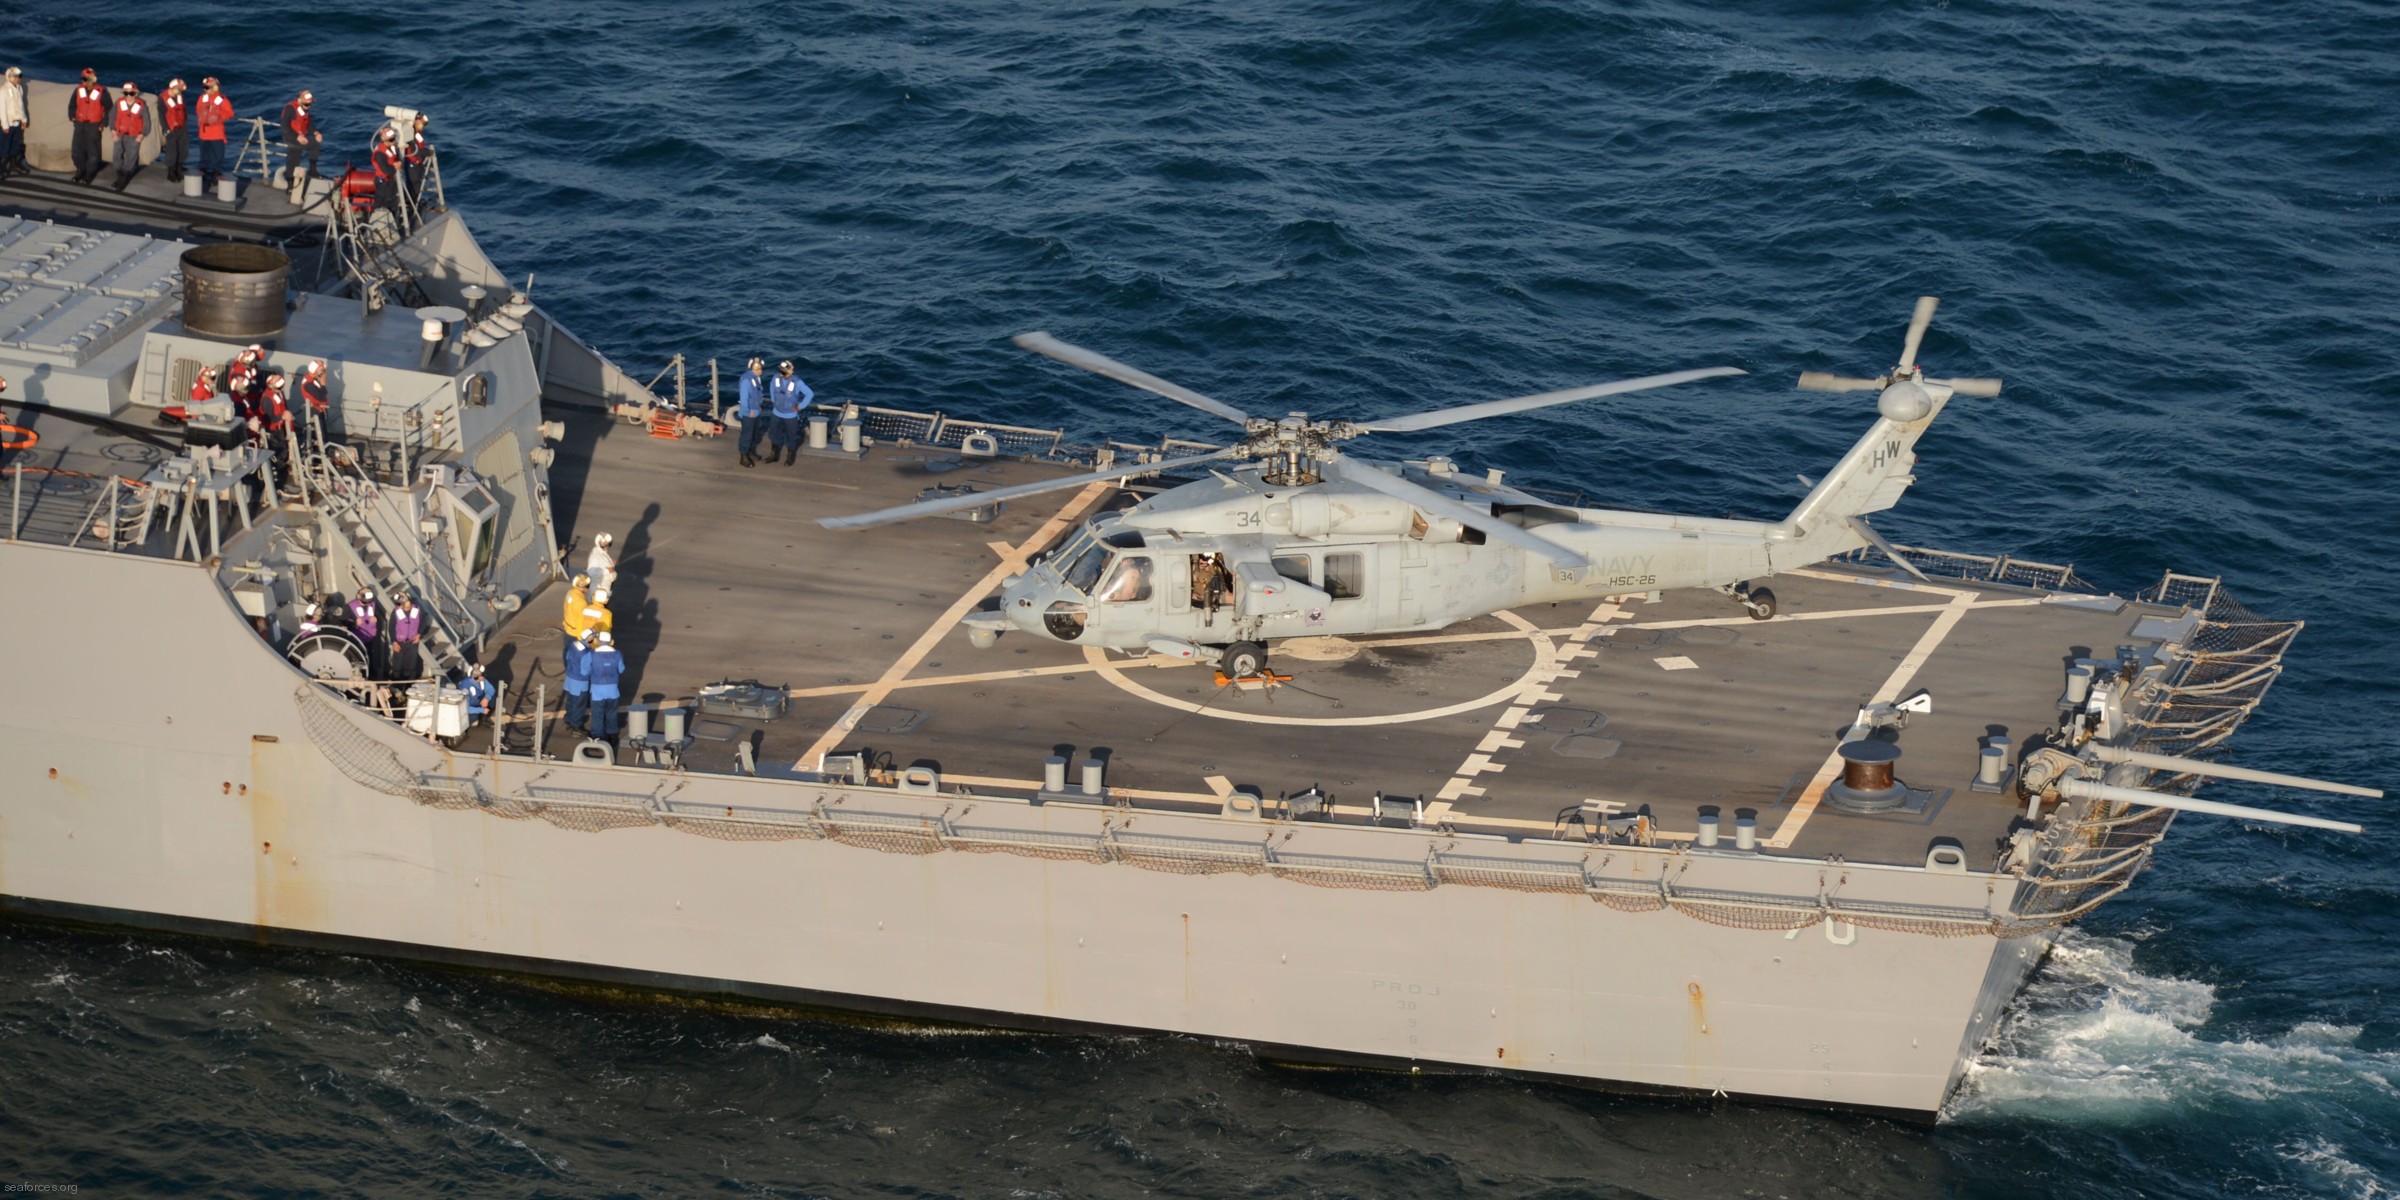 ddg-70 uss hopper guided missile destroyer arleigh burke class aegis bmd 78 mh-60s seahawk helicopter flight operations